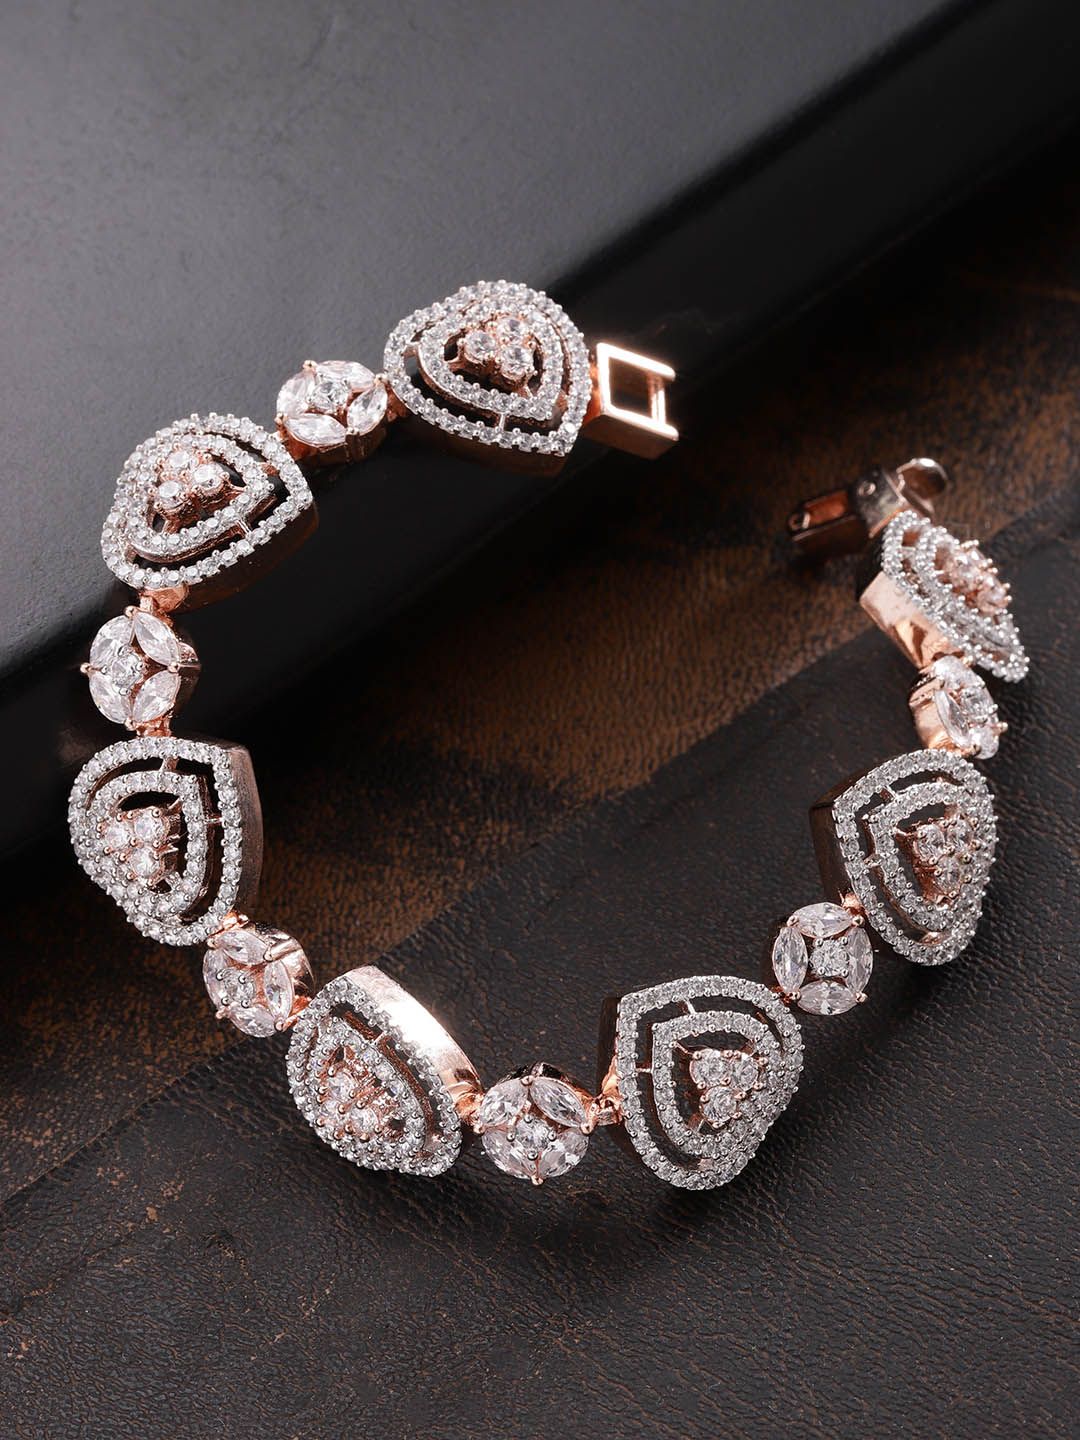 Priyaasi Rose Gold-Plated Handcrafted Link Bracelet Price in India